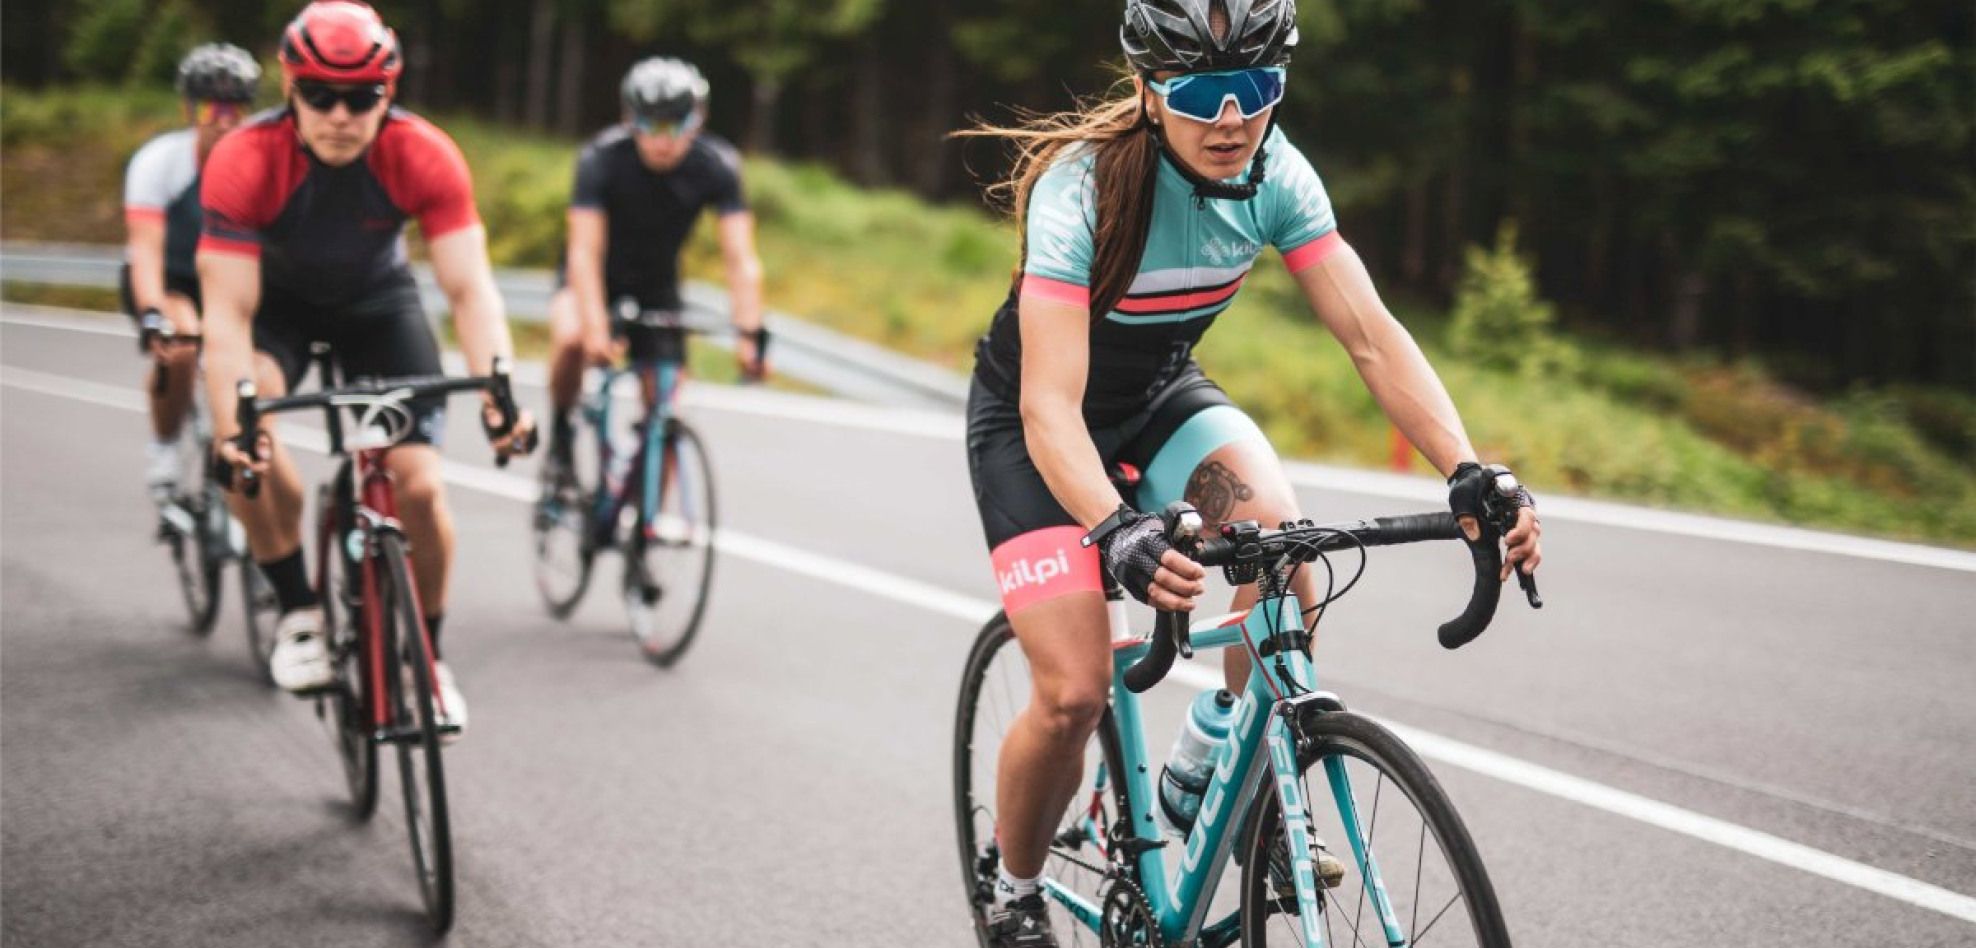 How to dress for cycling or all you need to know about cycling gear